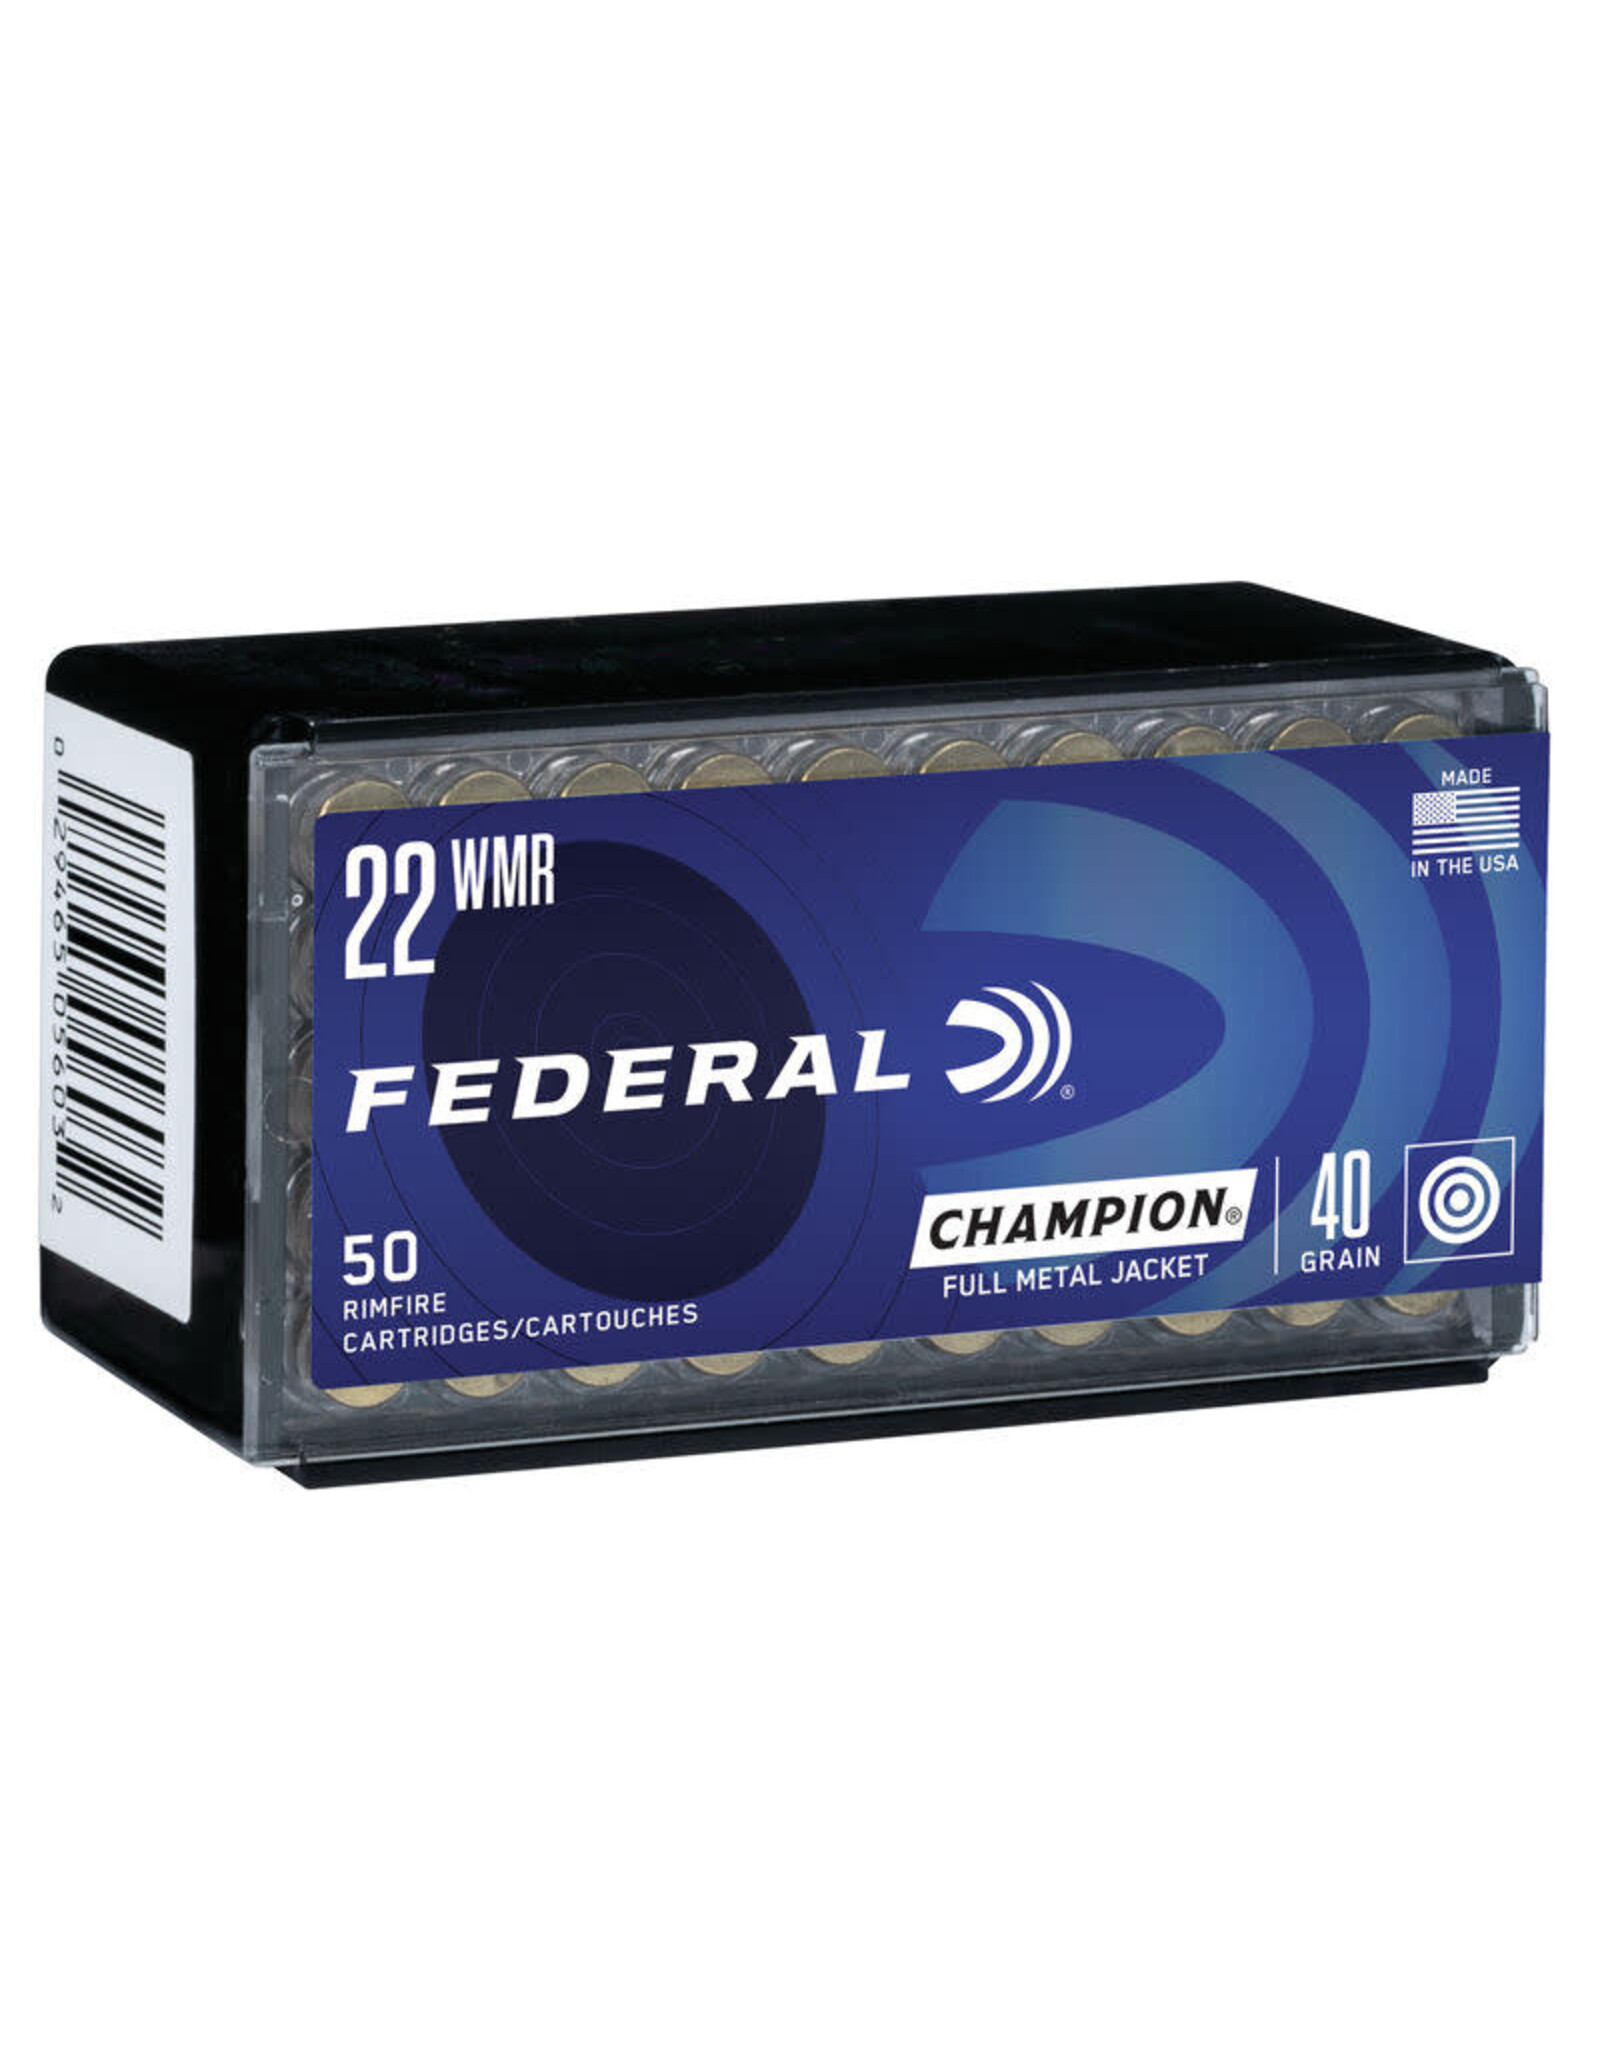 Federal Federal 737 Champion Rimfire Rifle Ammo 22 WMR, FMJ, 40 Grains, 1880 fps, 50 Rounds, Boxed